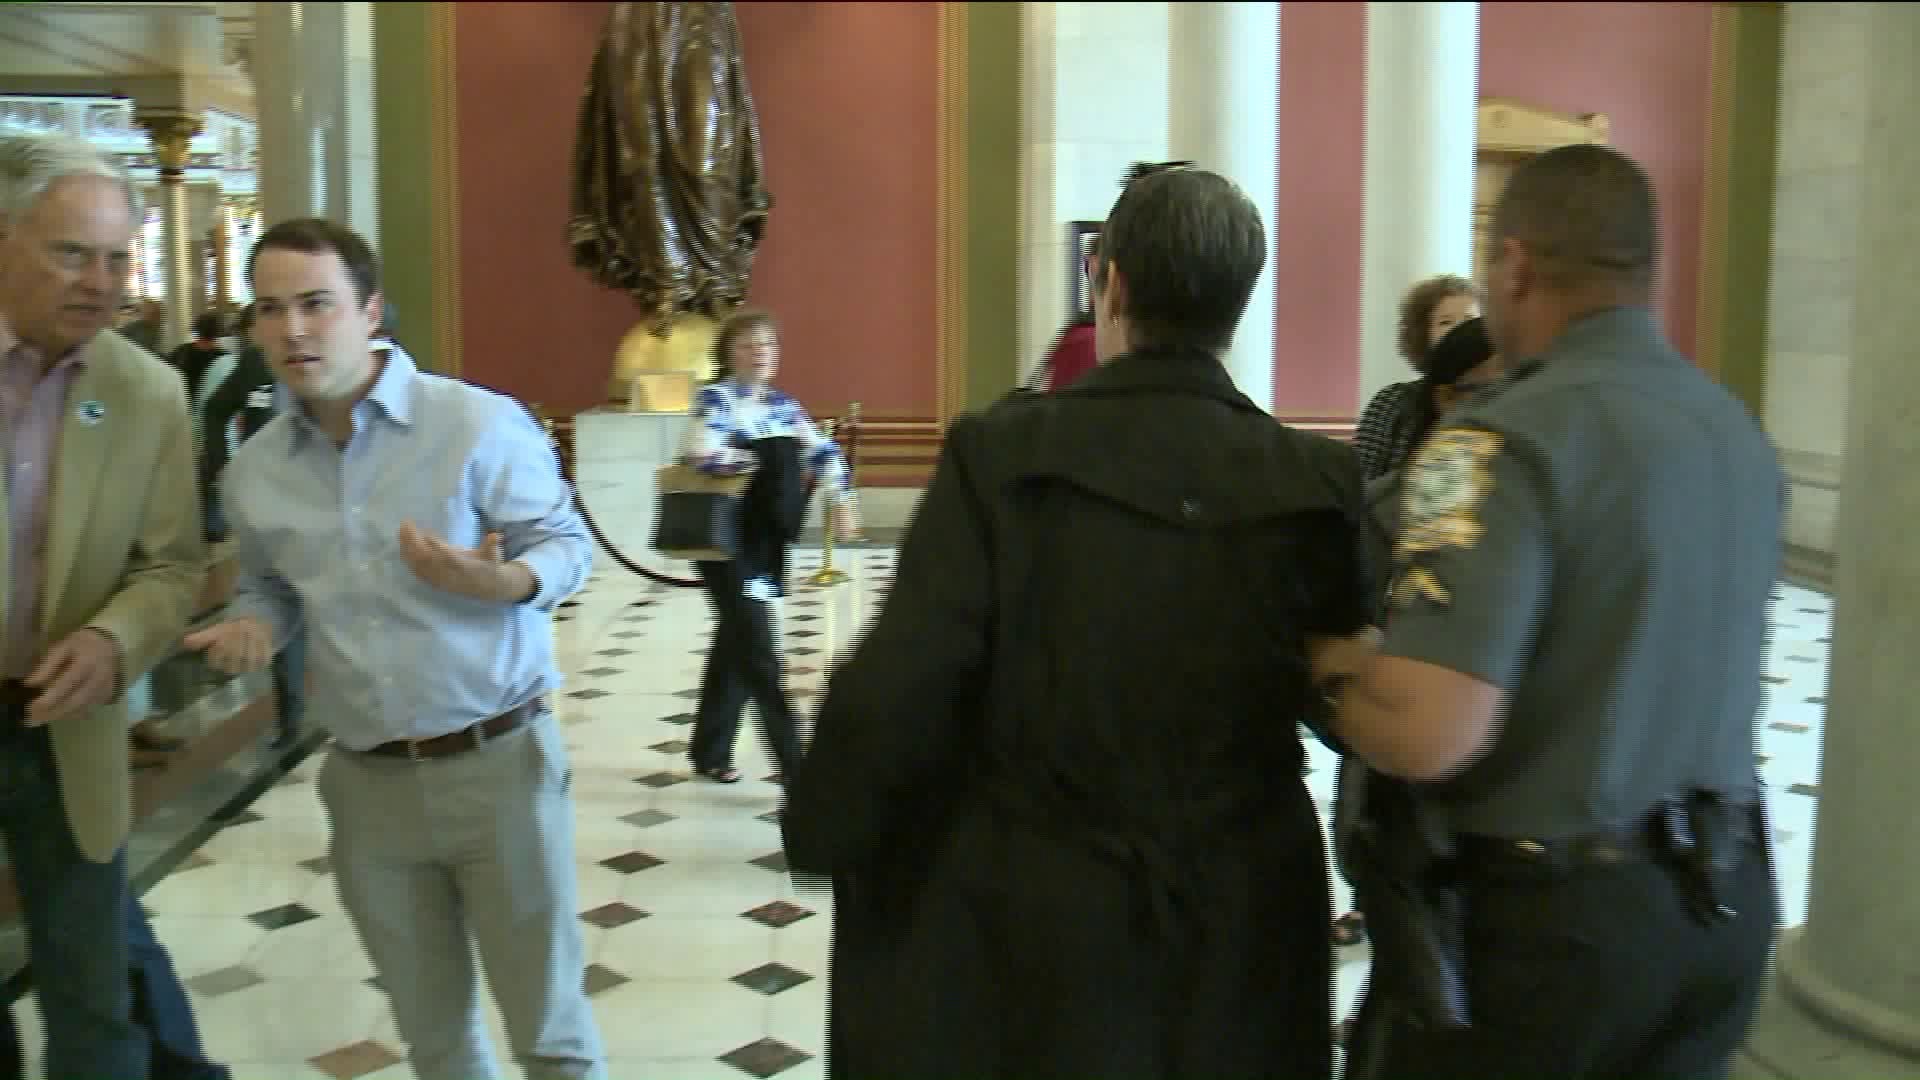 Protesters arrested at Capitol